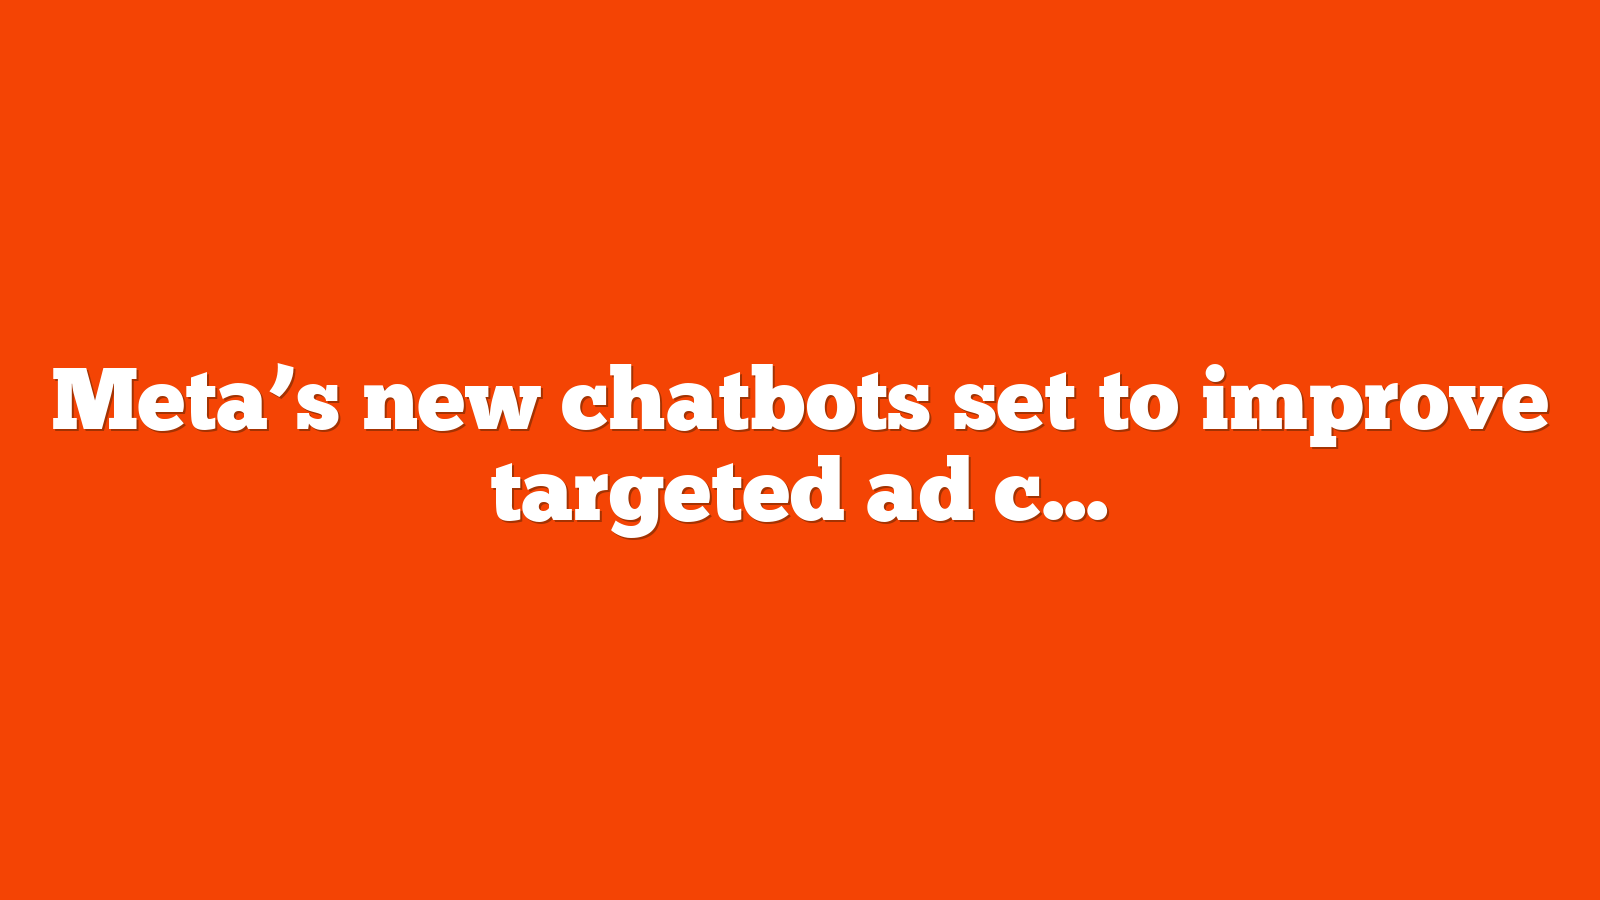 Meta’s new chatbots set to improve targeted ad capabilities